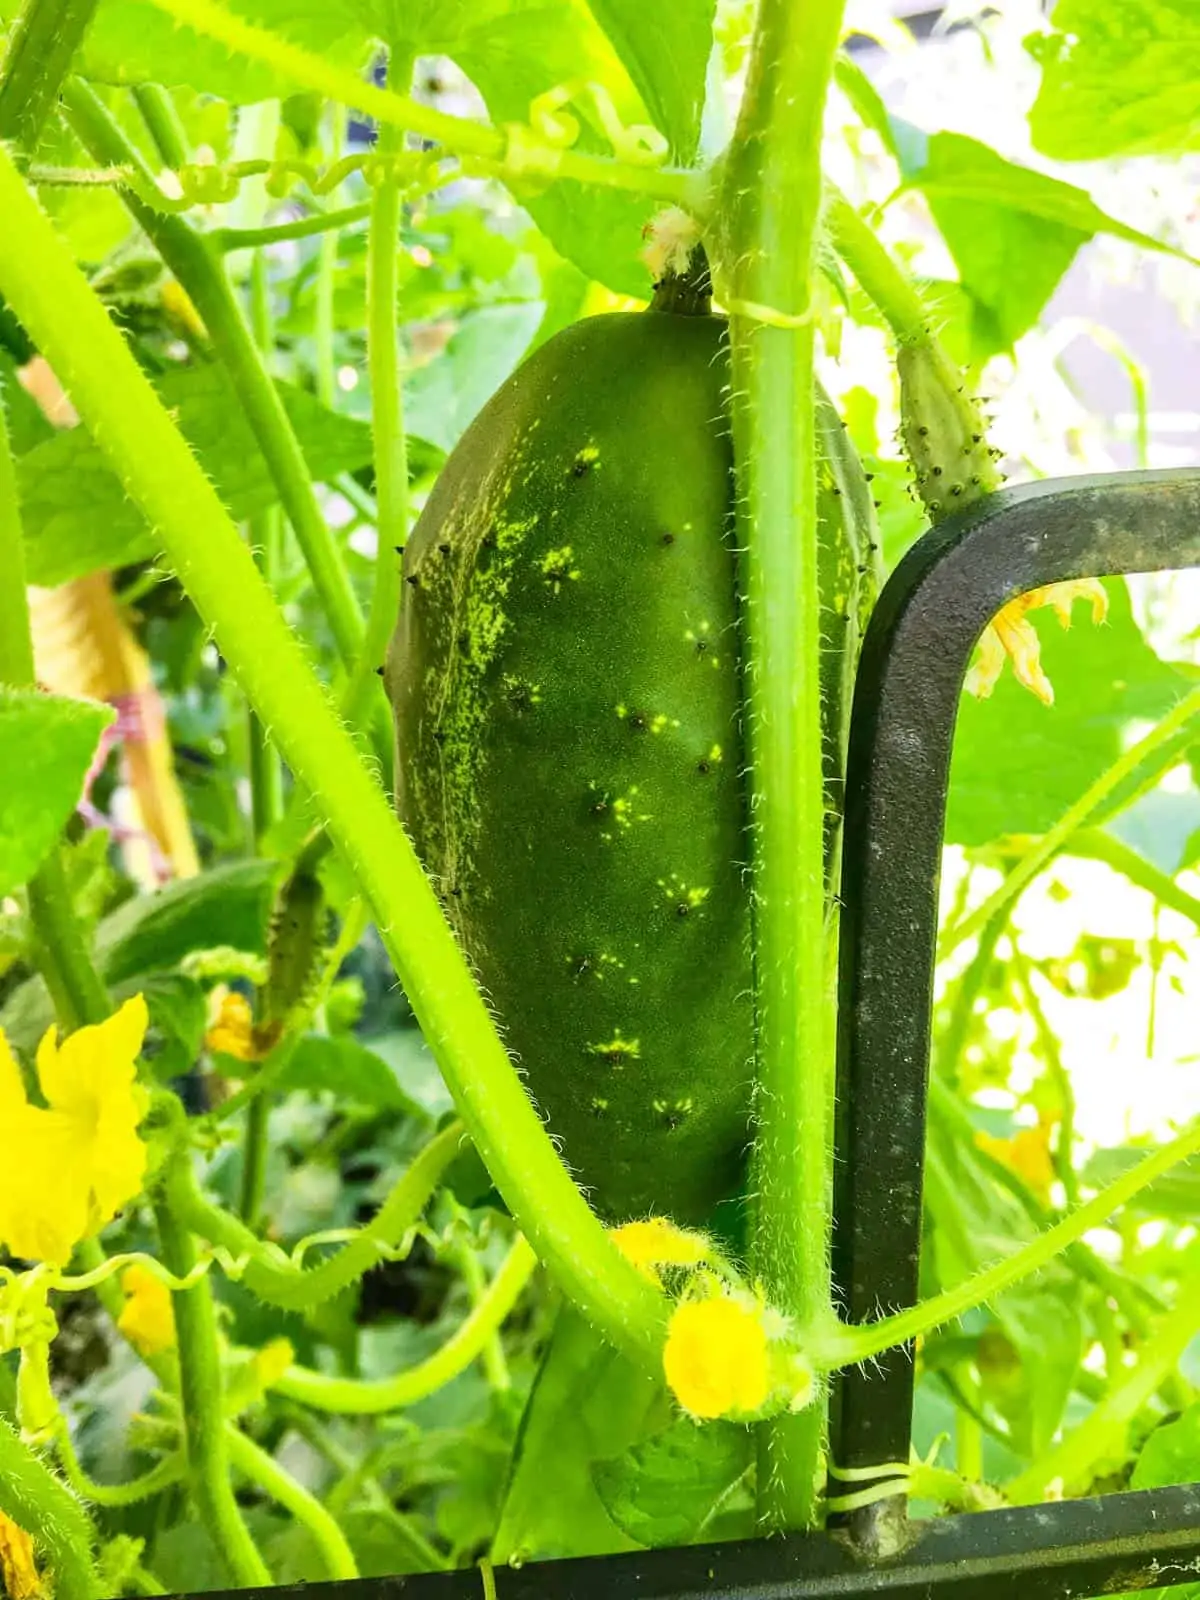 A large cucumber growing on a vine in a garden resting on a black iron trellis.